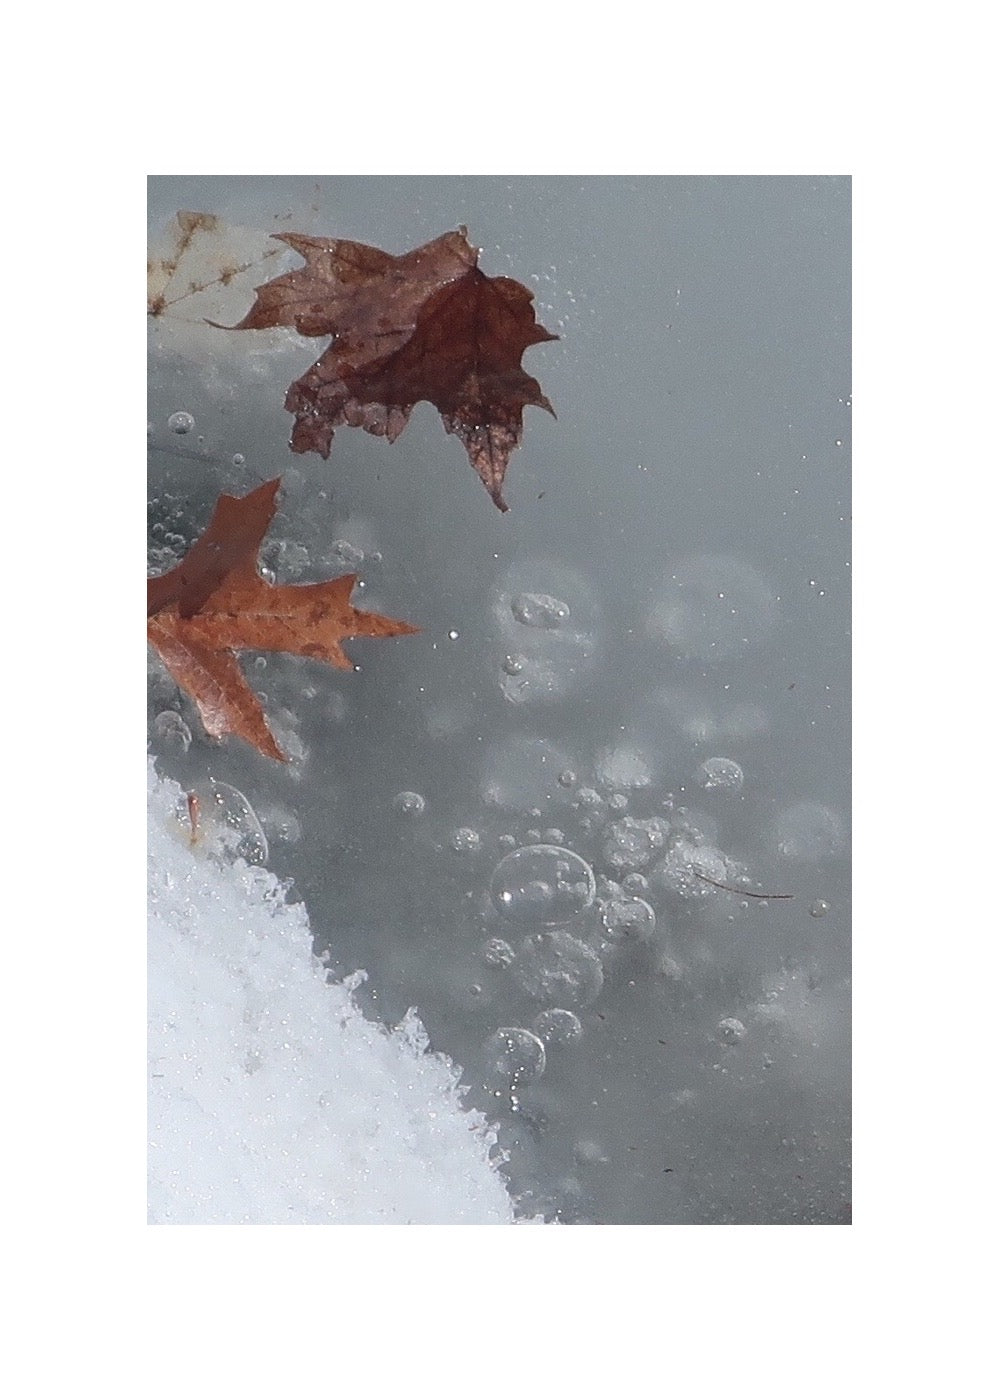 Ambiguity Series #4 (Air Bubbles and Leaves) 1/20